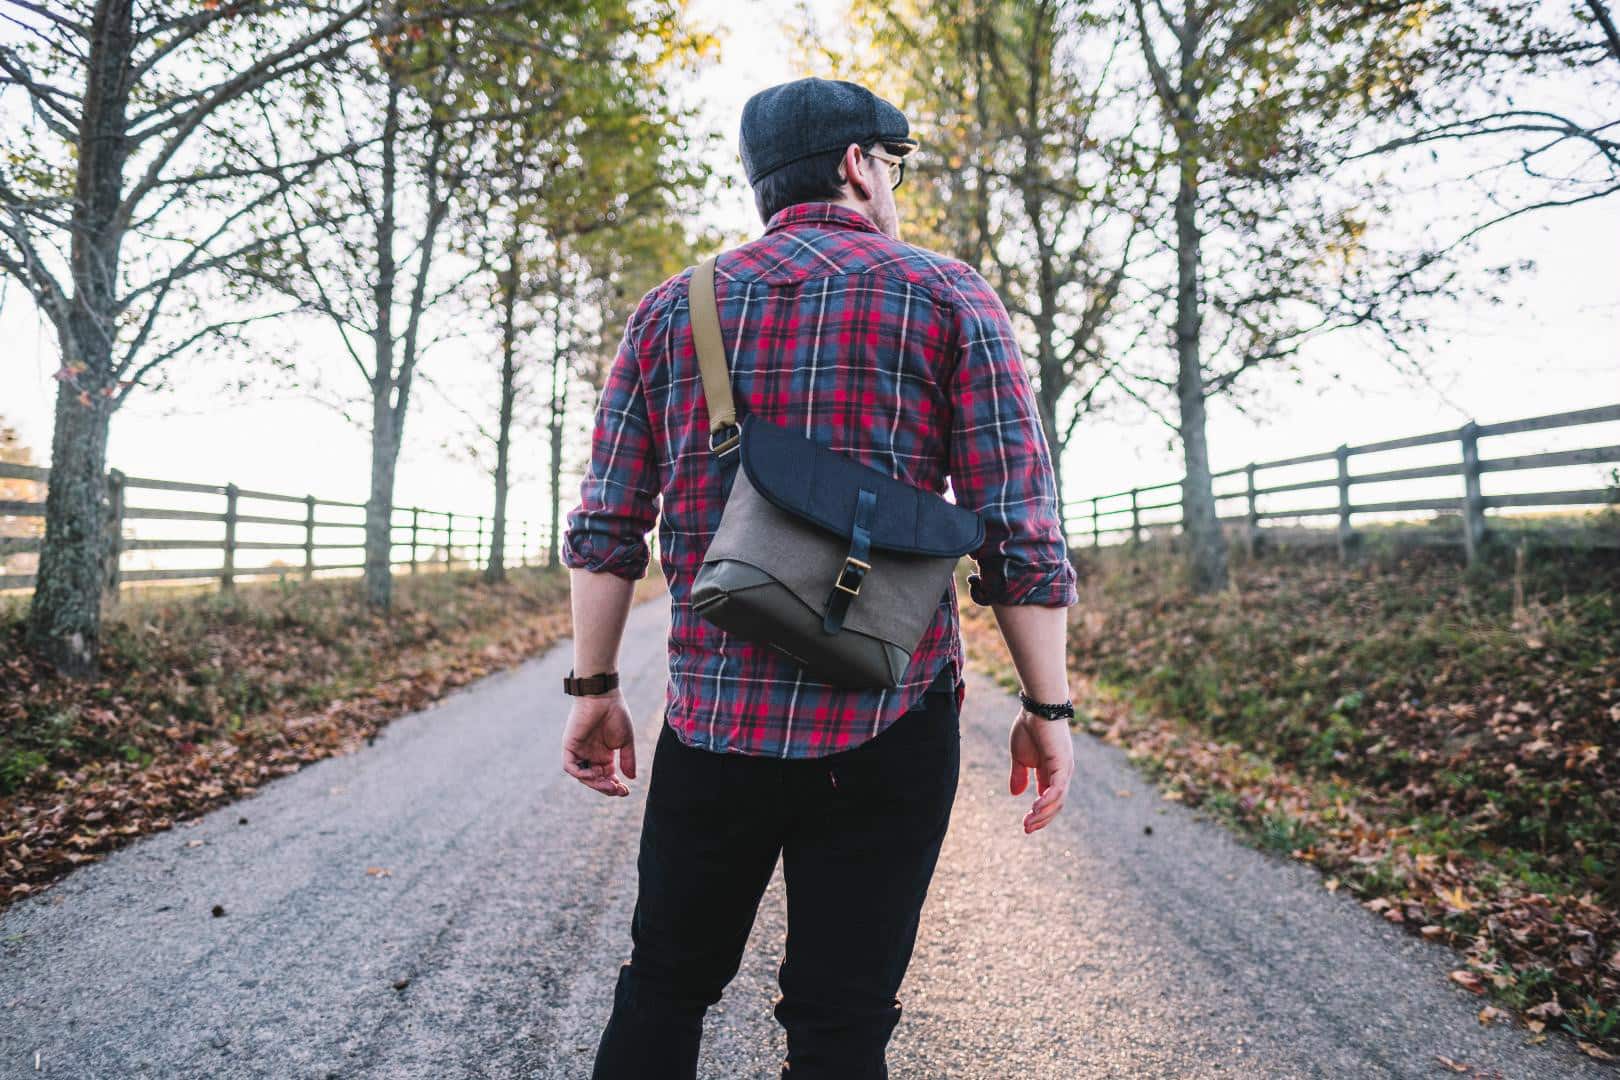 The Top Camera Bags for Travel Photography